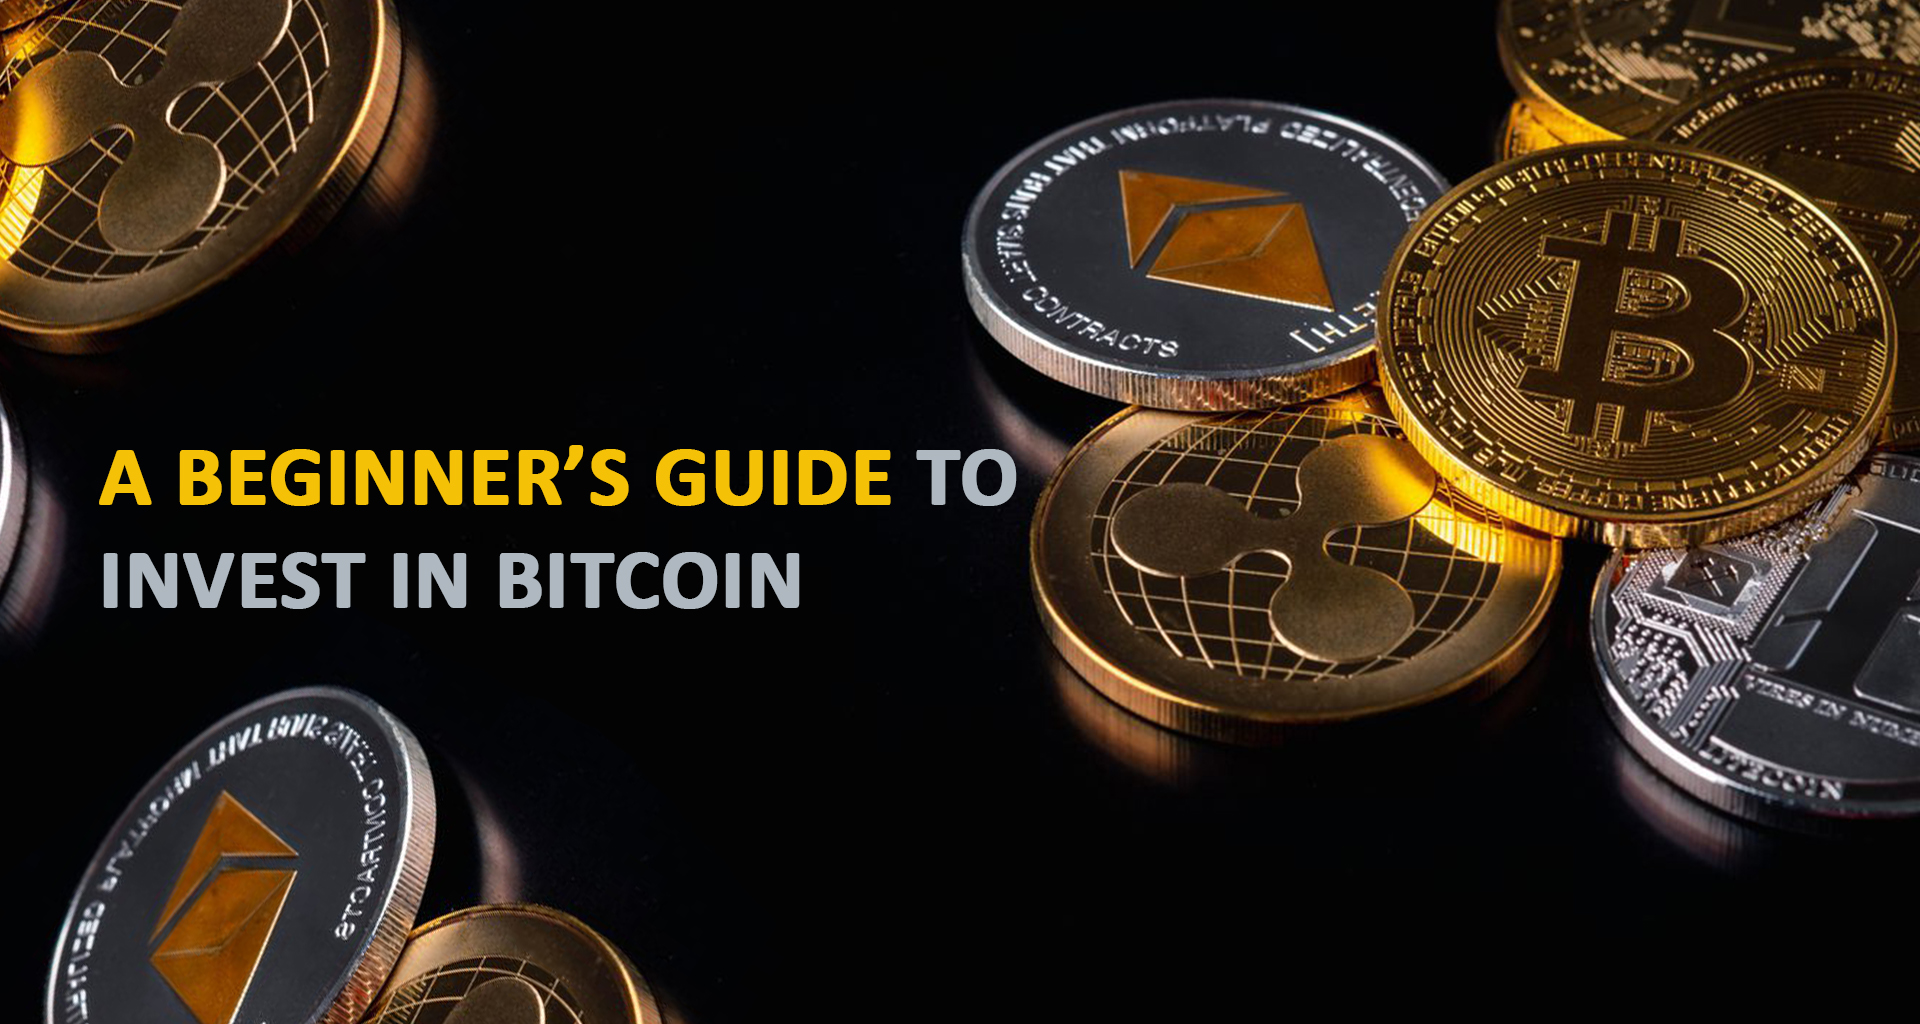 A Beginner’s Guide To Invest in Bitcoin